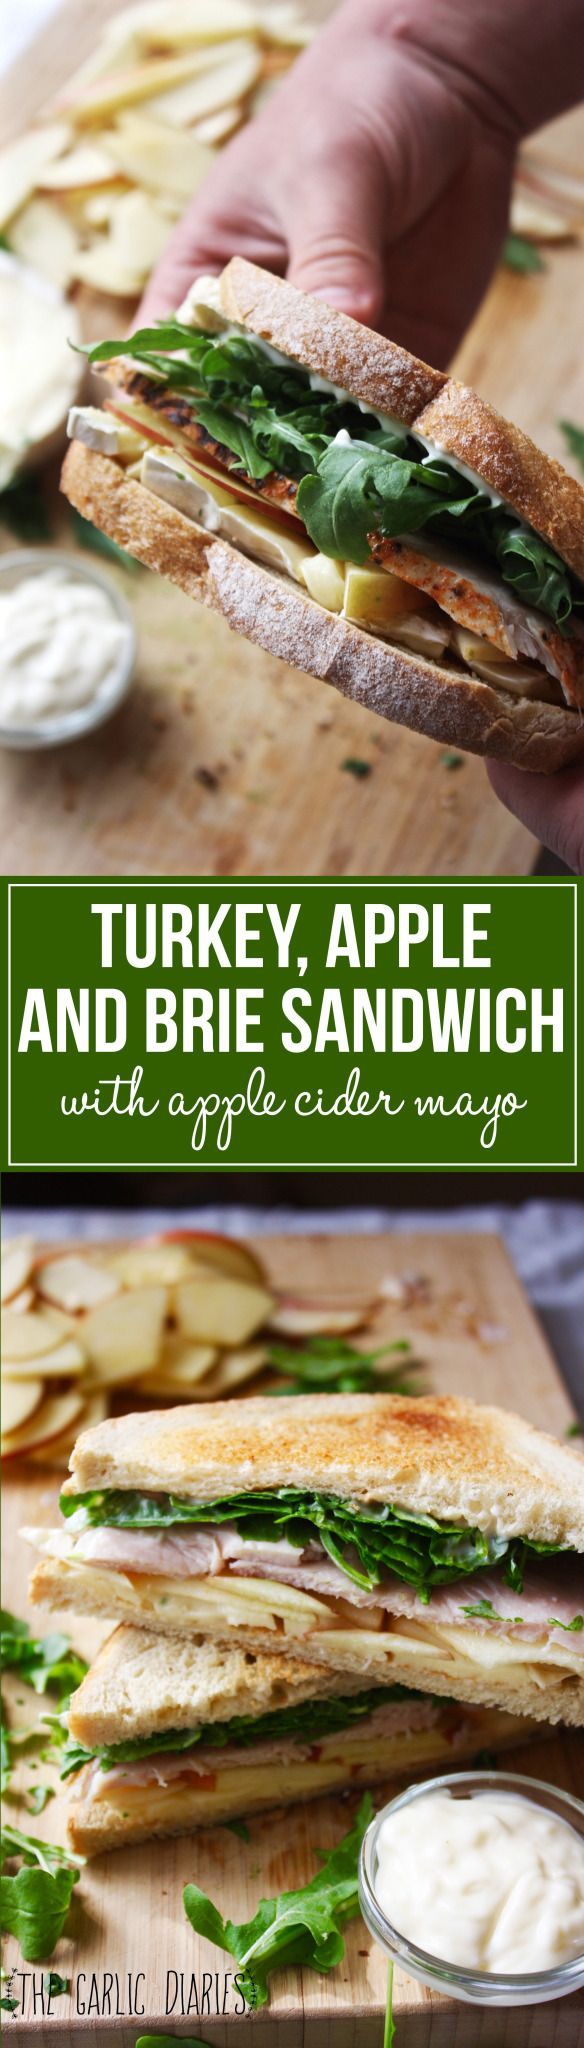 Turkey, Apple, and Brie Sandwich with Apple Cider Mayo